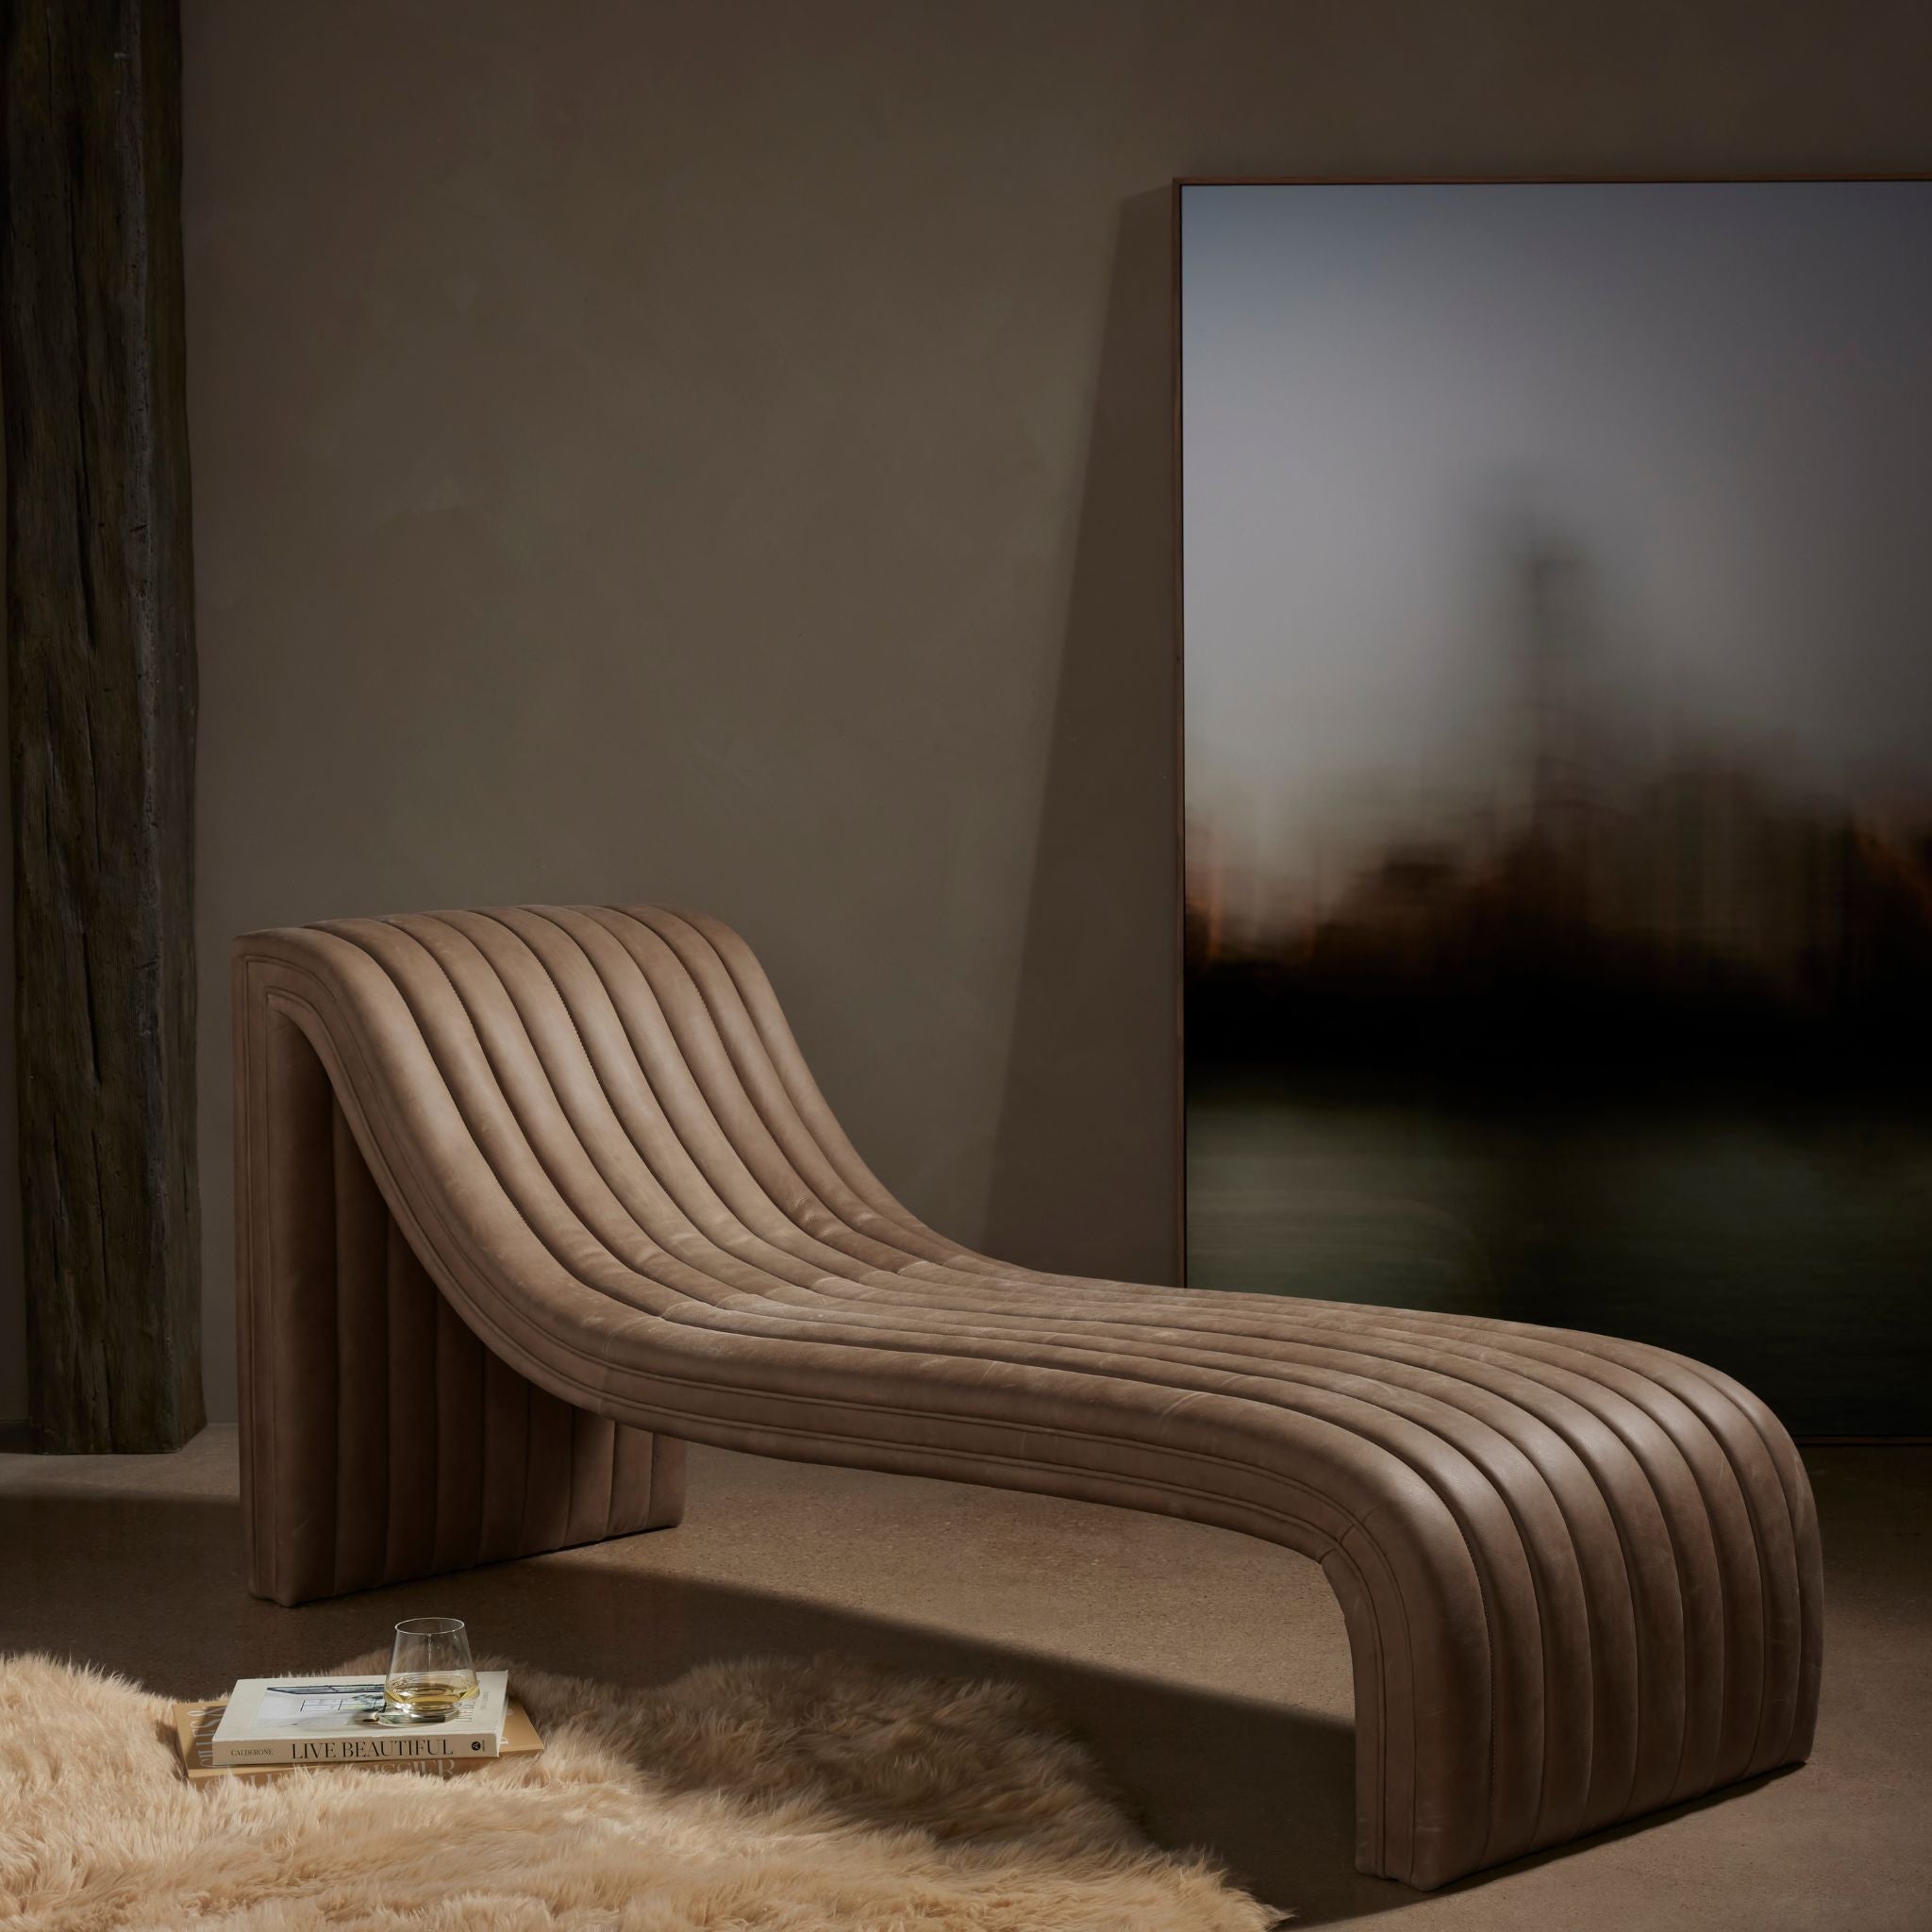 AUGUSTINE CHAISE LOUNGE